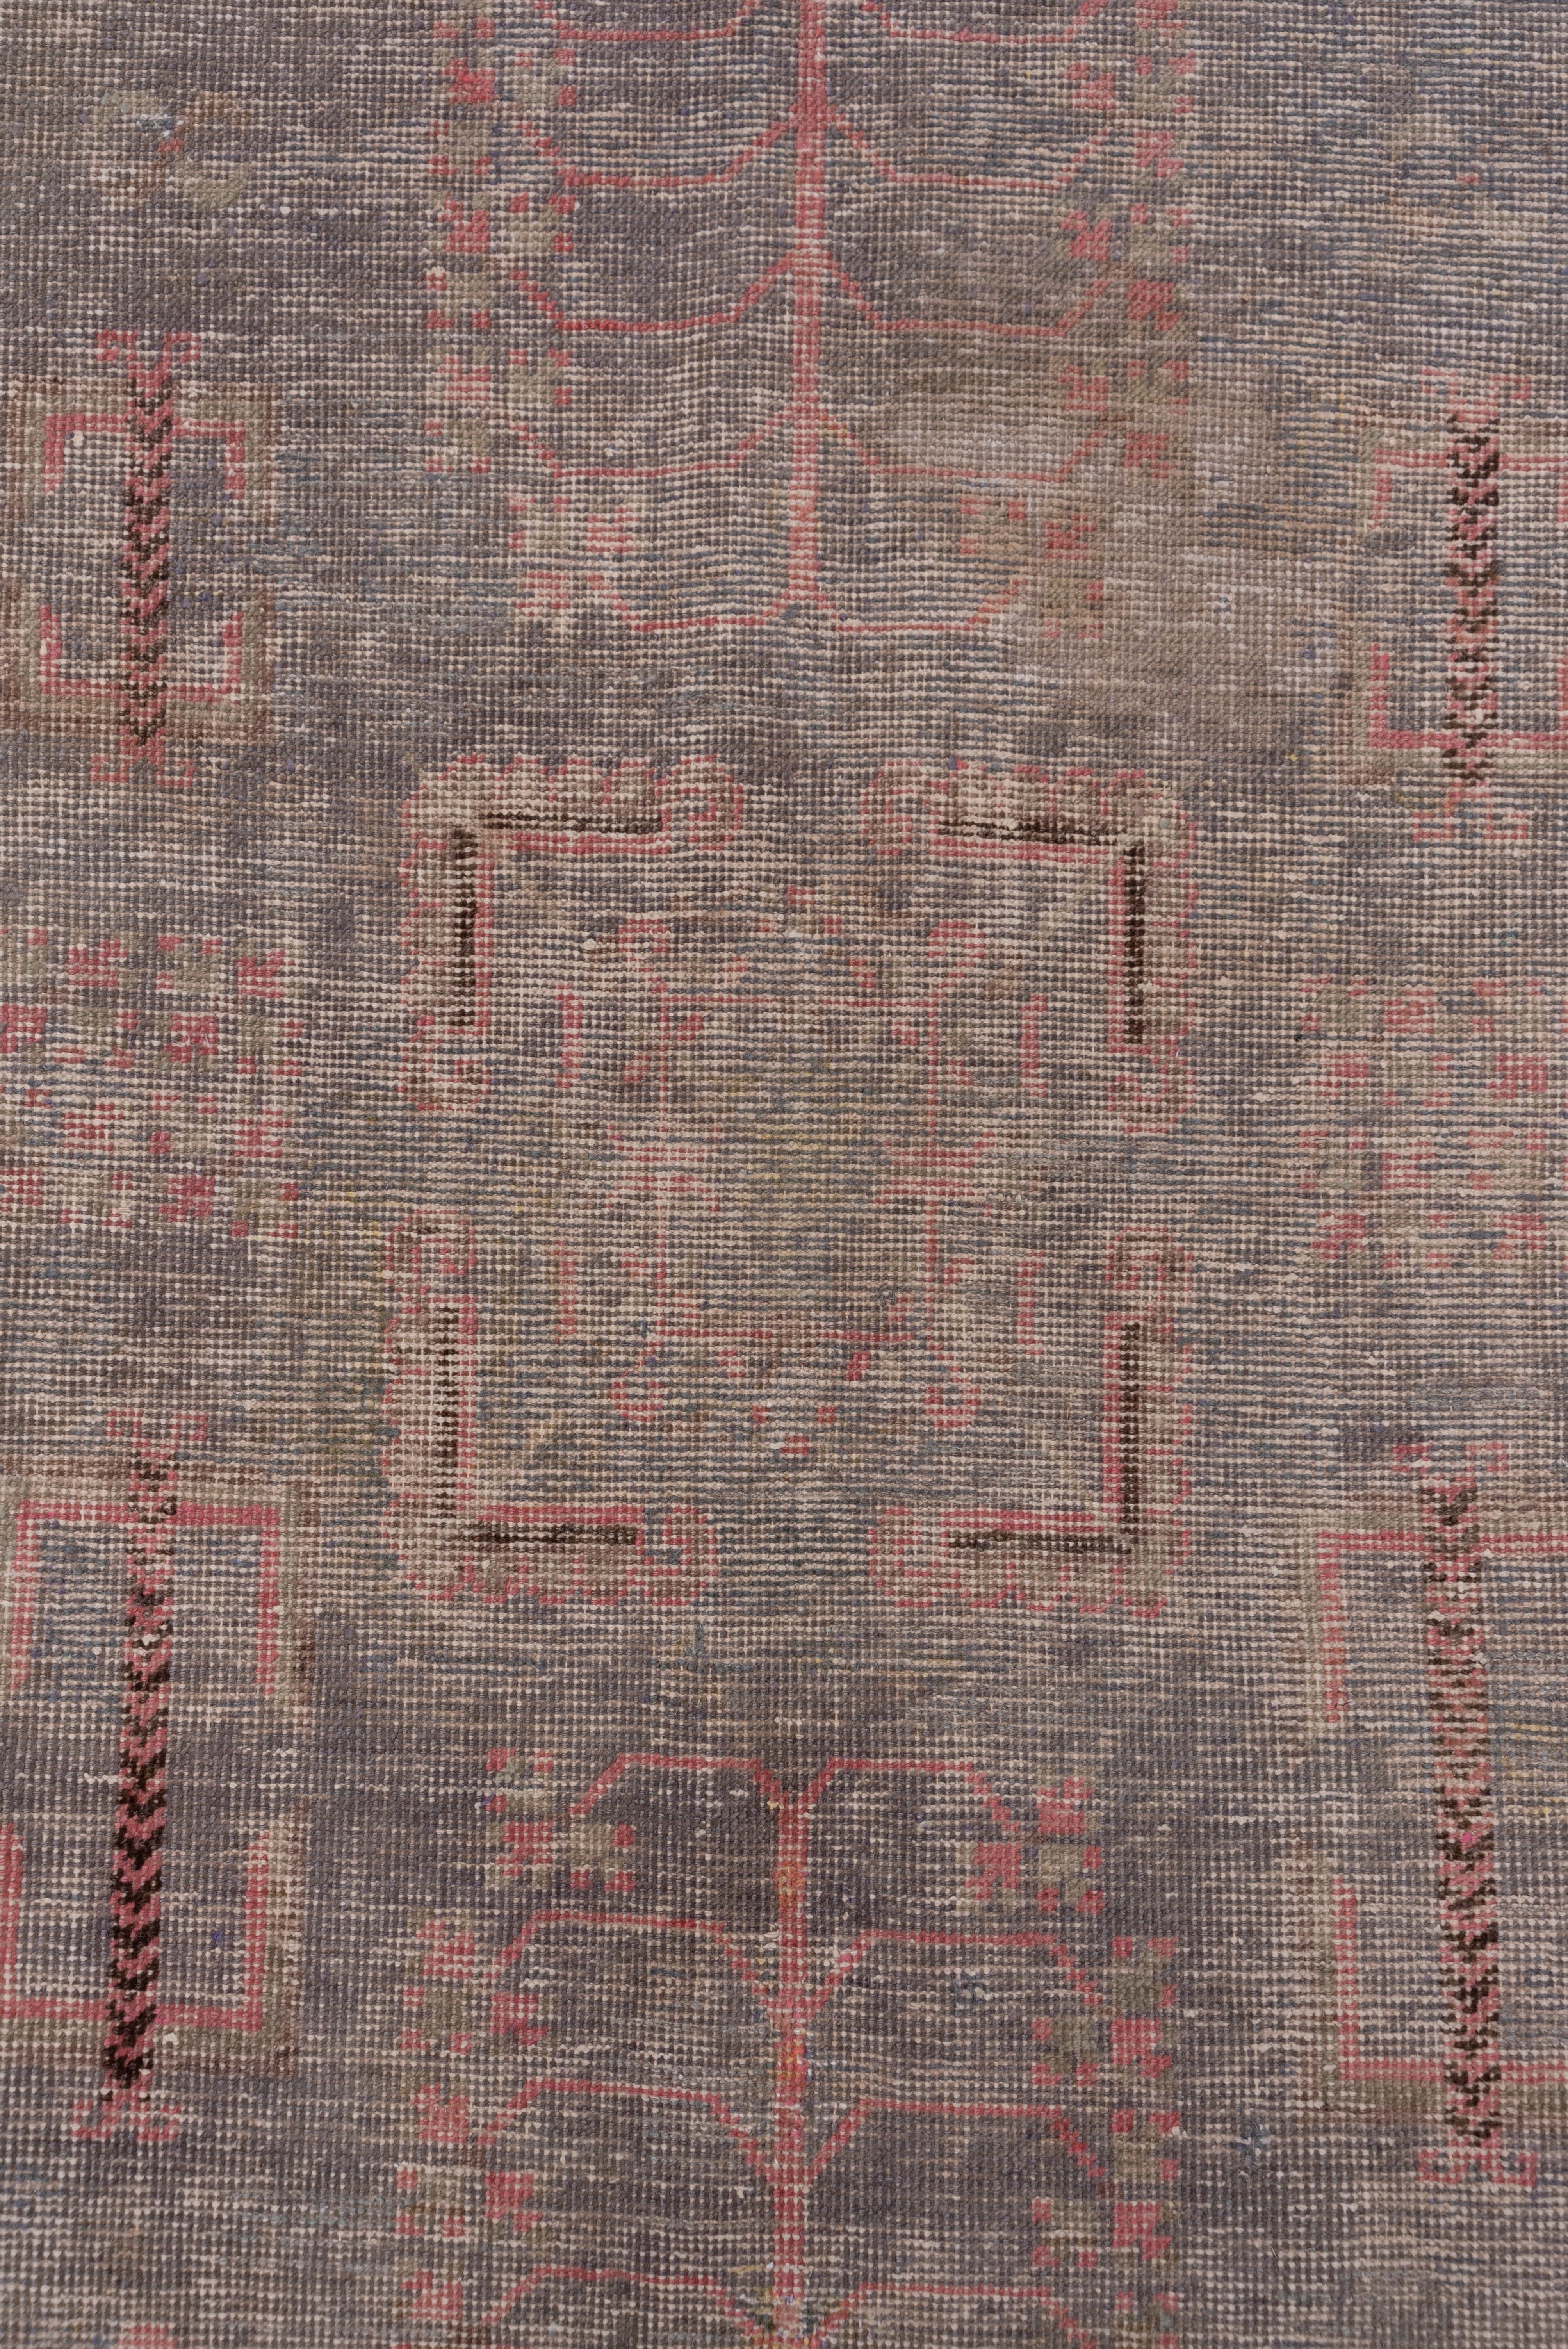 Antique Khotan Rug, Light Gray Field, Pink Borders, Lighly Distressed In Good Condition For Sale In New York, NY